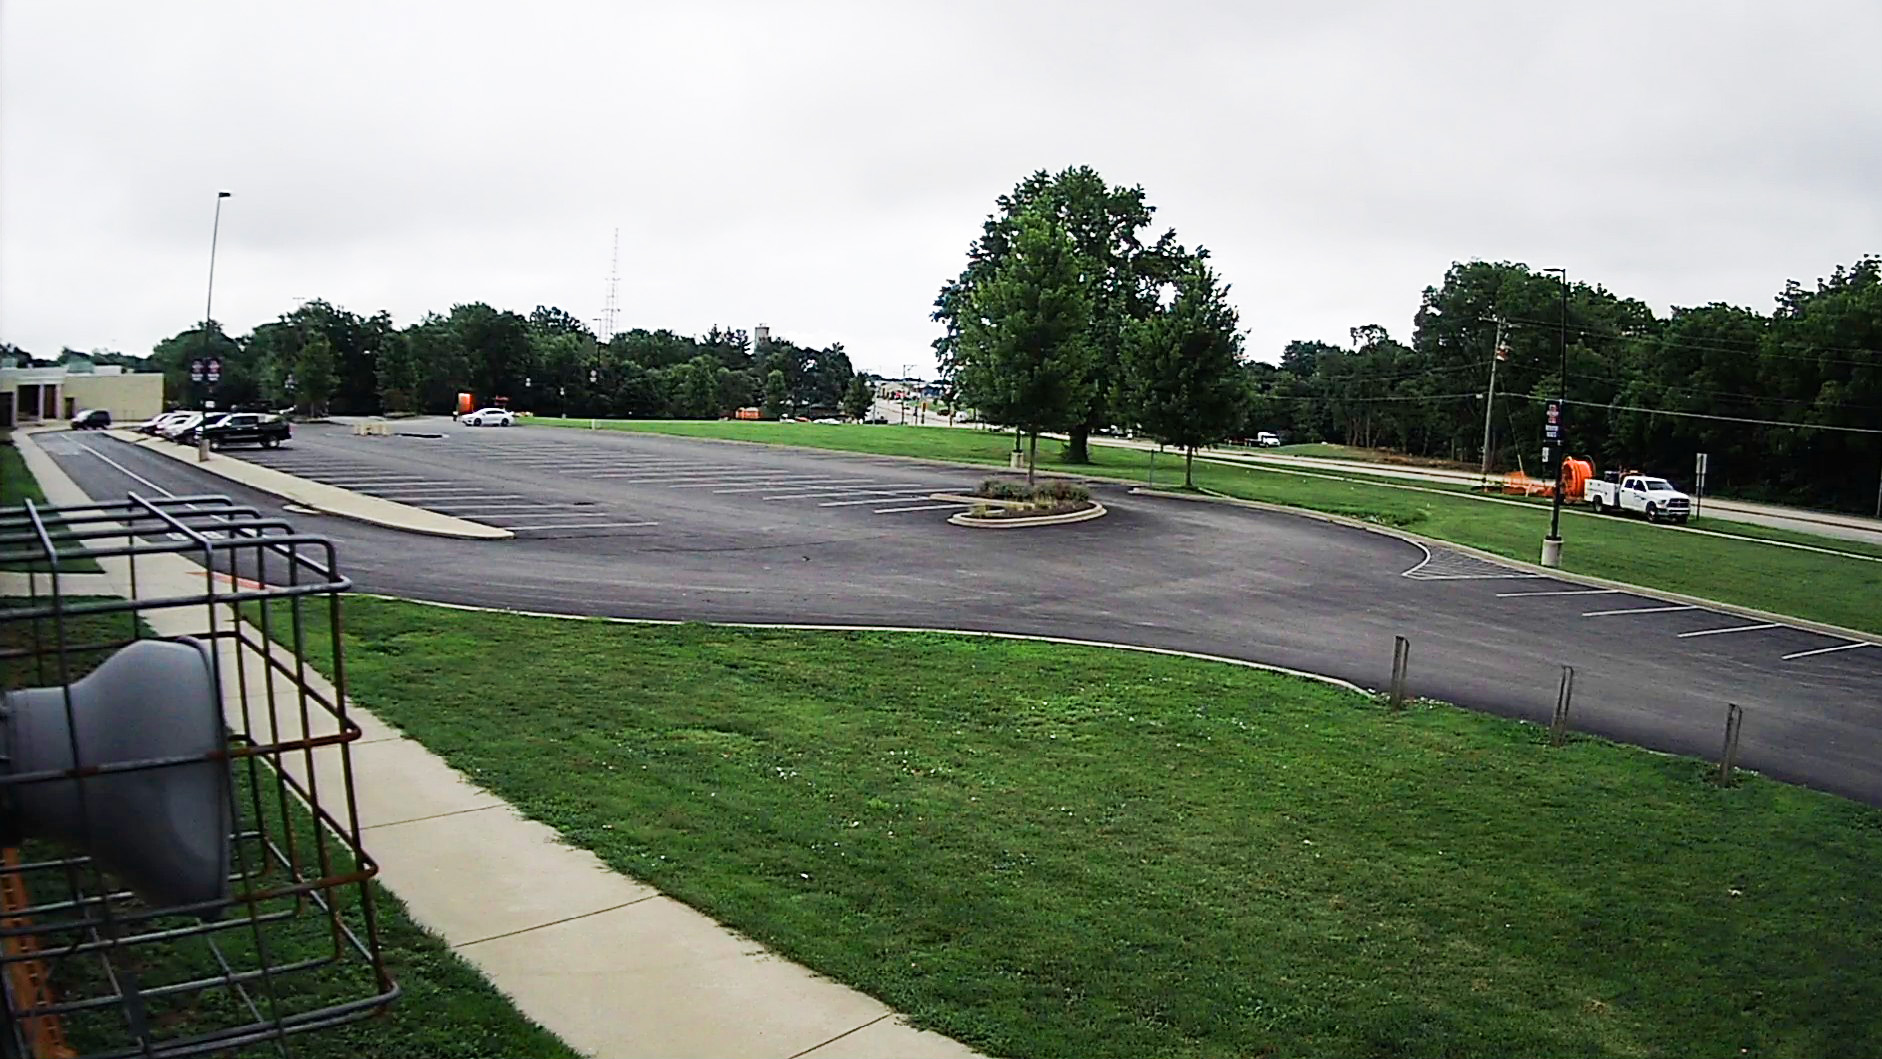 Parking lot and sidewalk shown after cameras were upgraded to HD